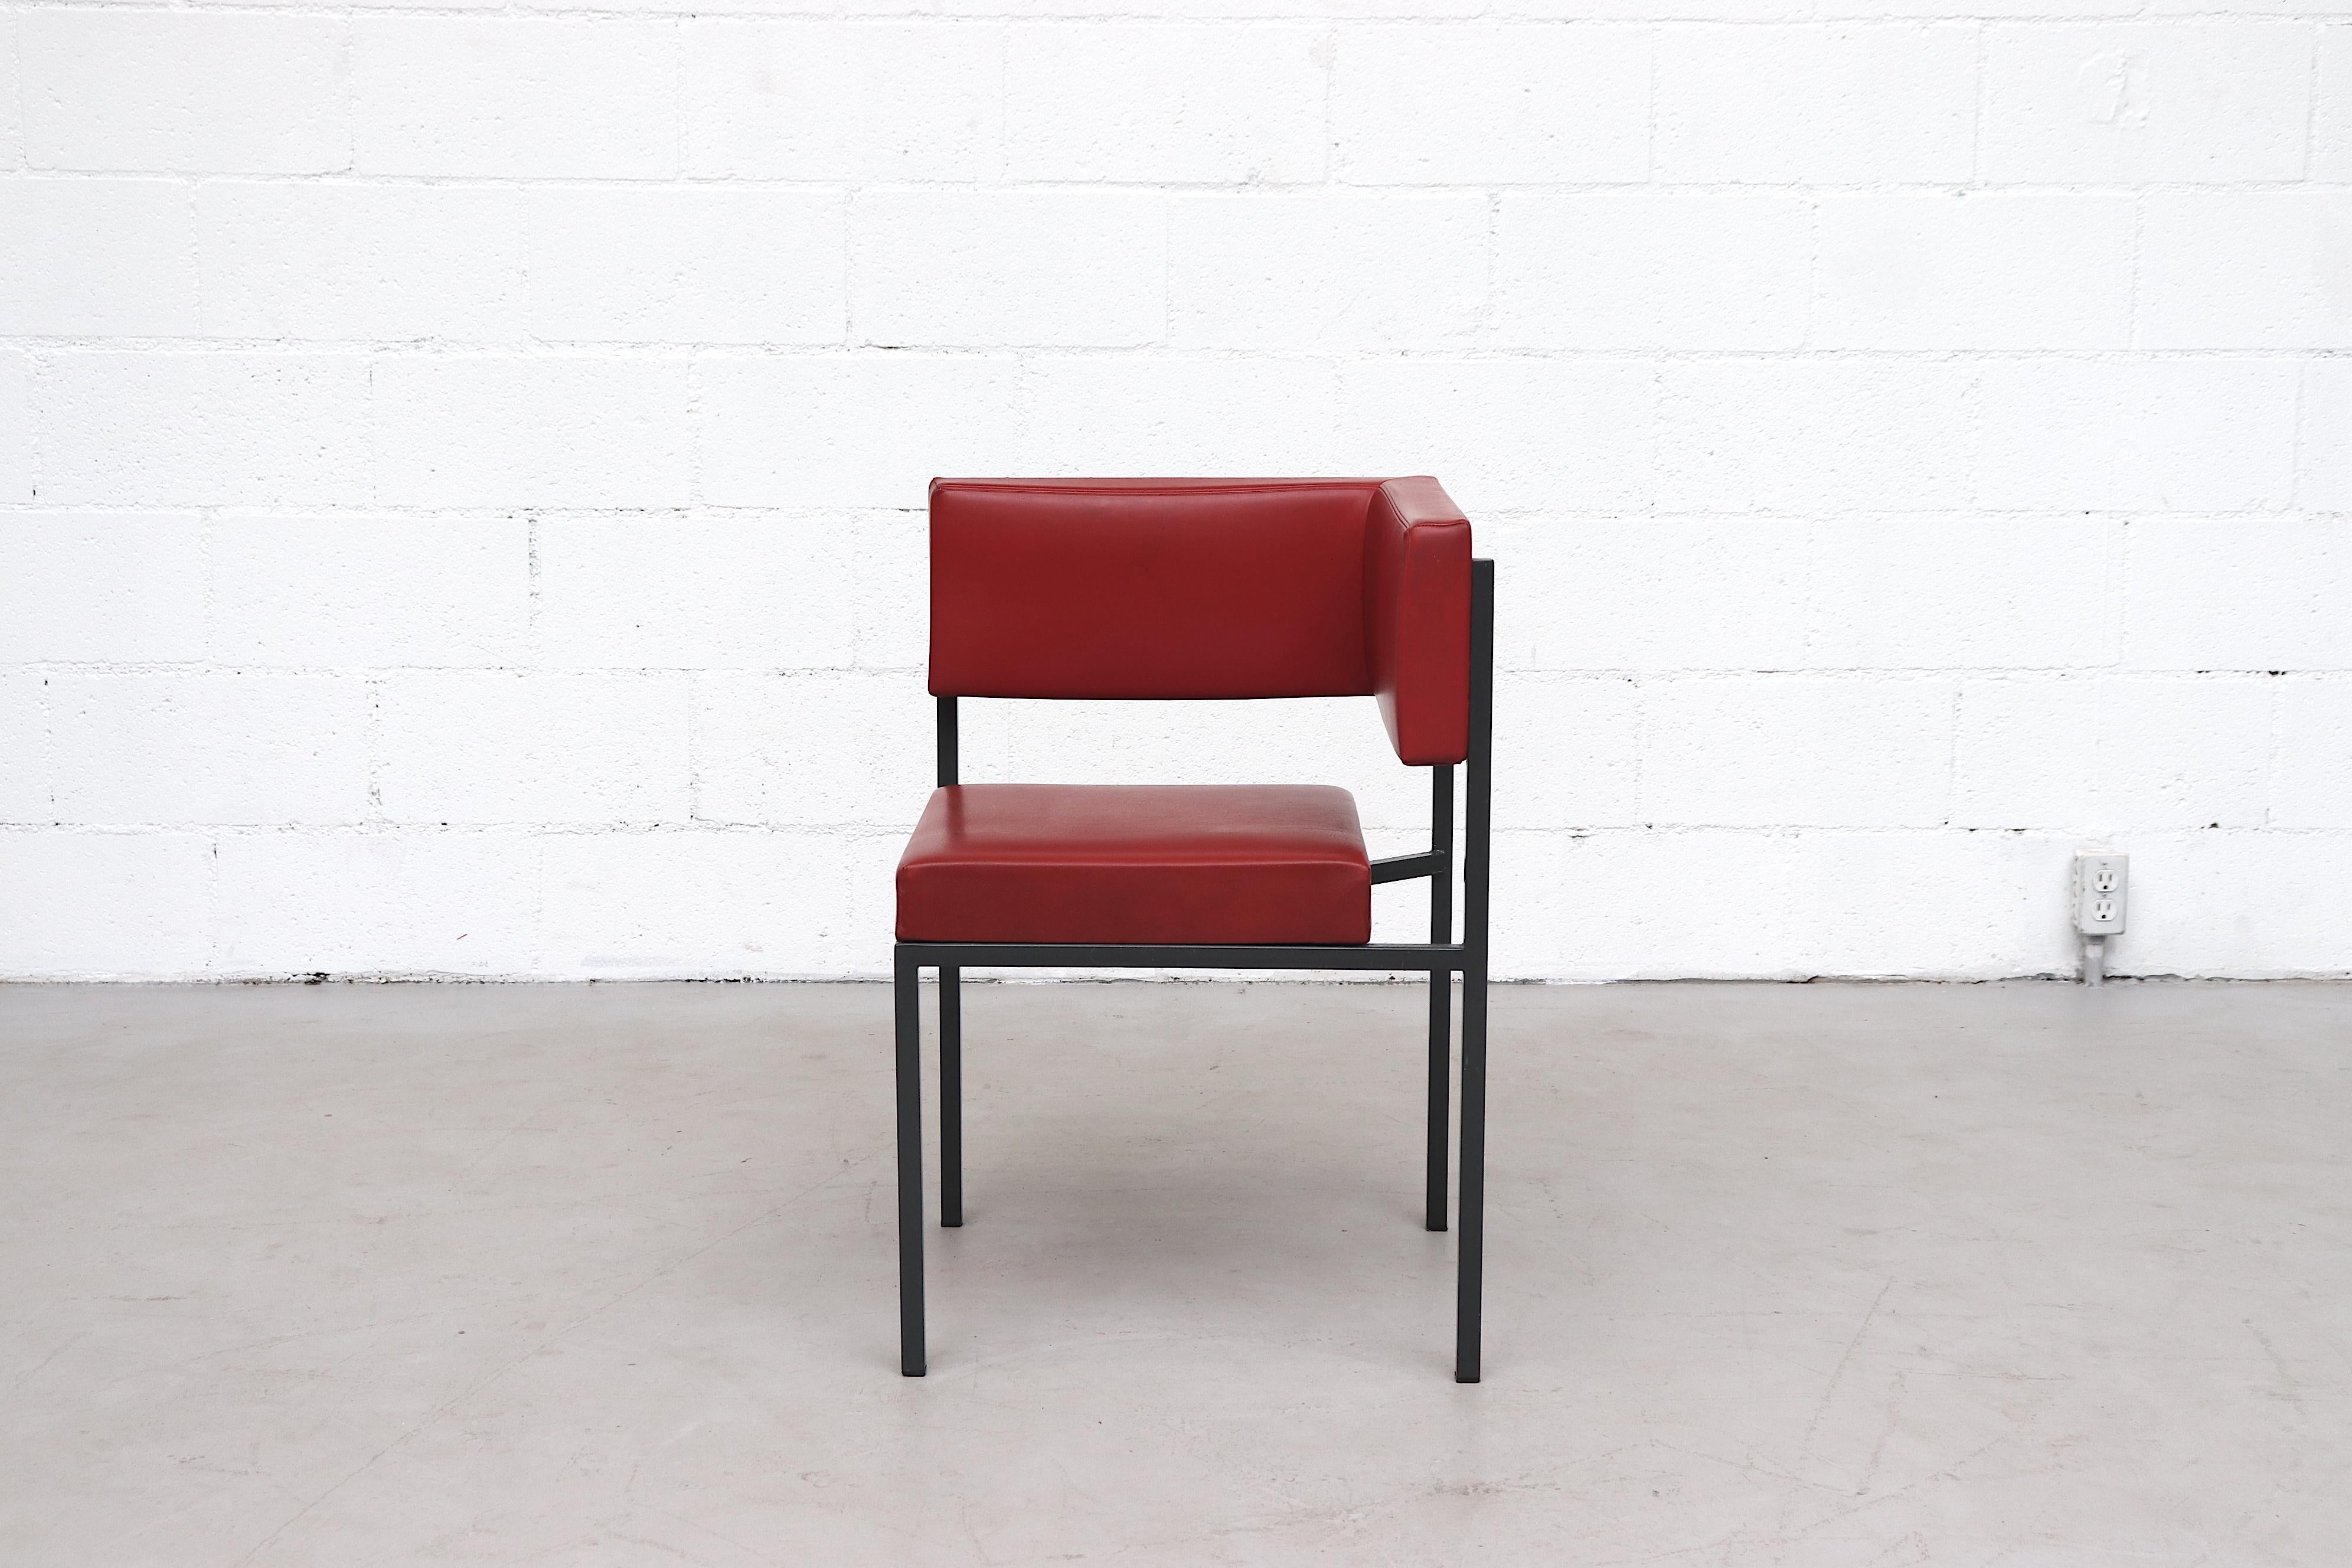 Awesome midcentury red skai corner chair. Original red skai upholstery on a square almost black enameled metal frame. In original condition with some wear and visible blemish to skai and light wear to frame.